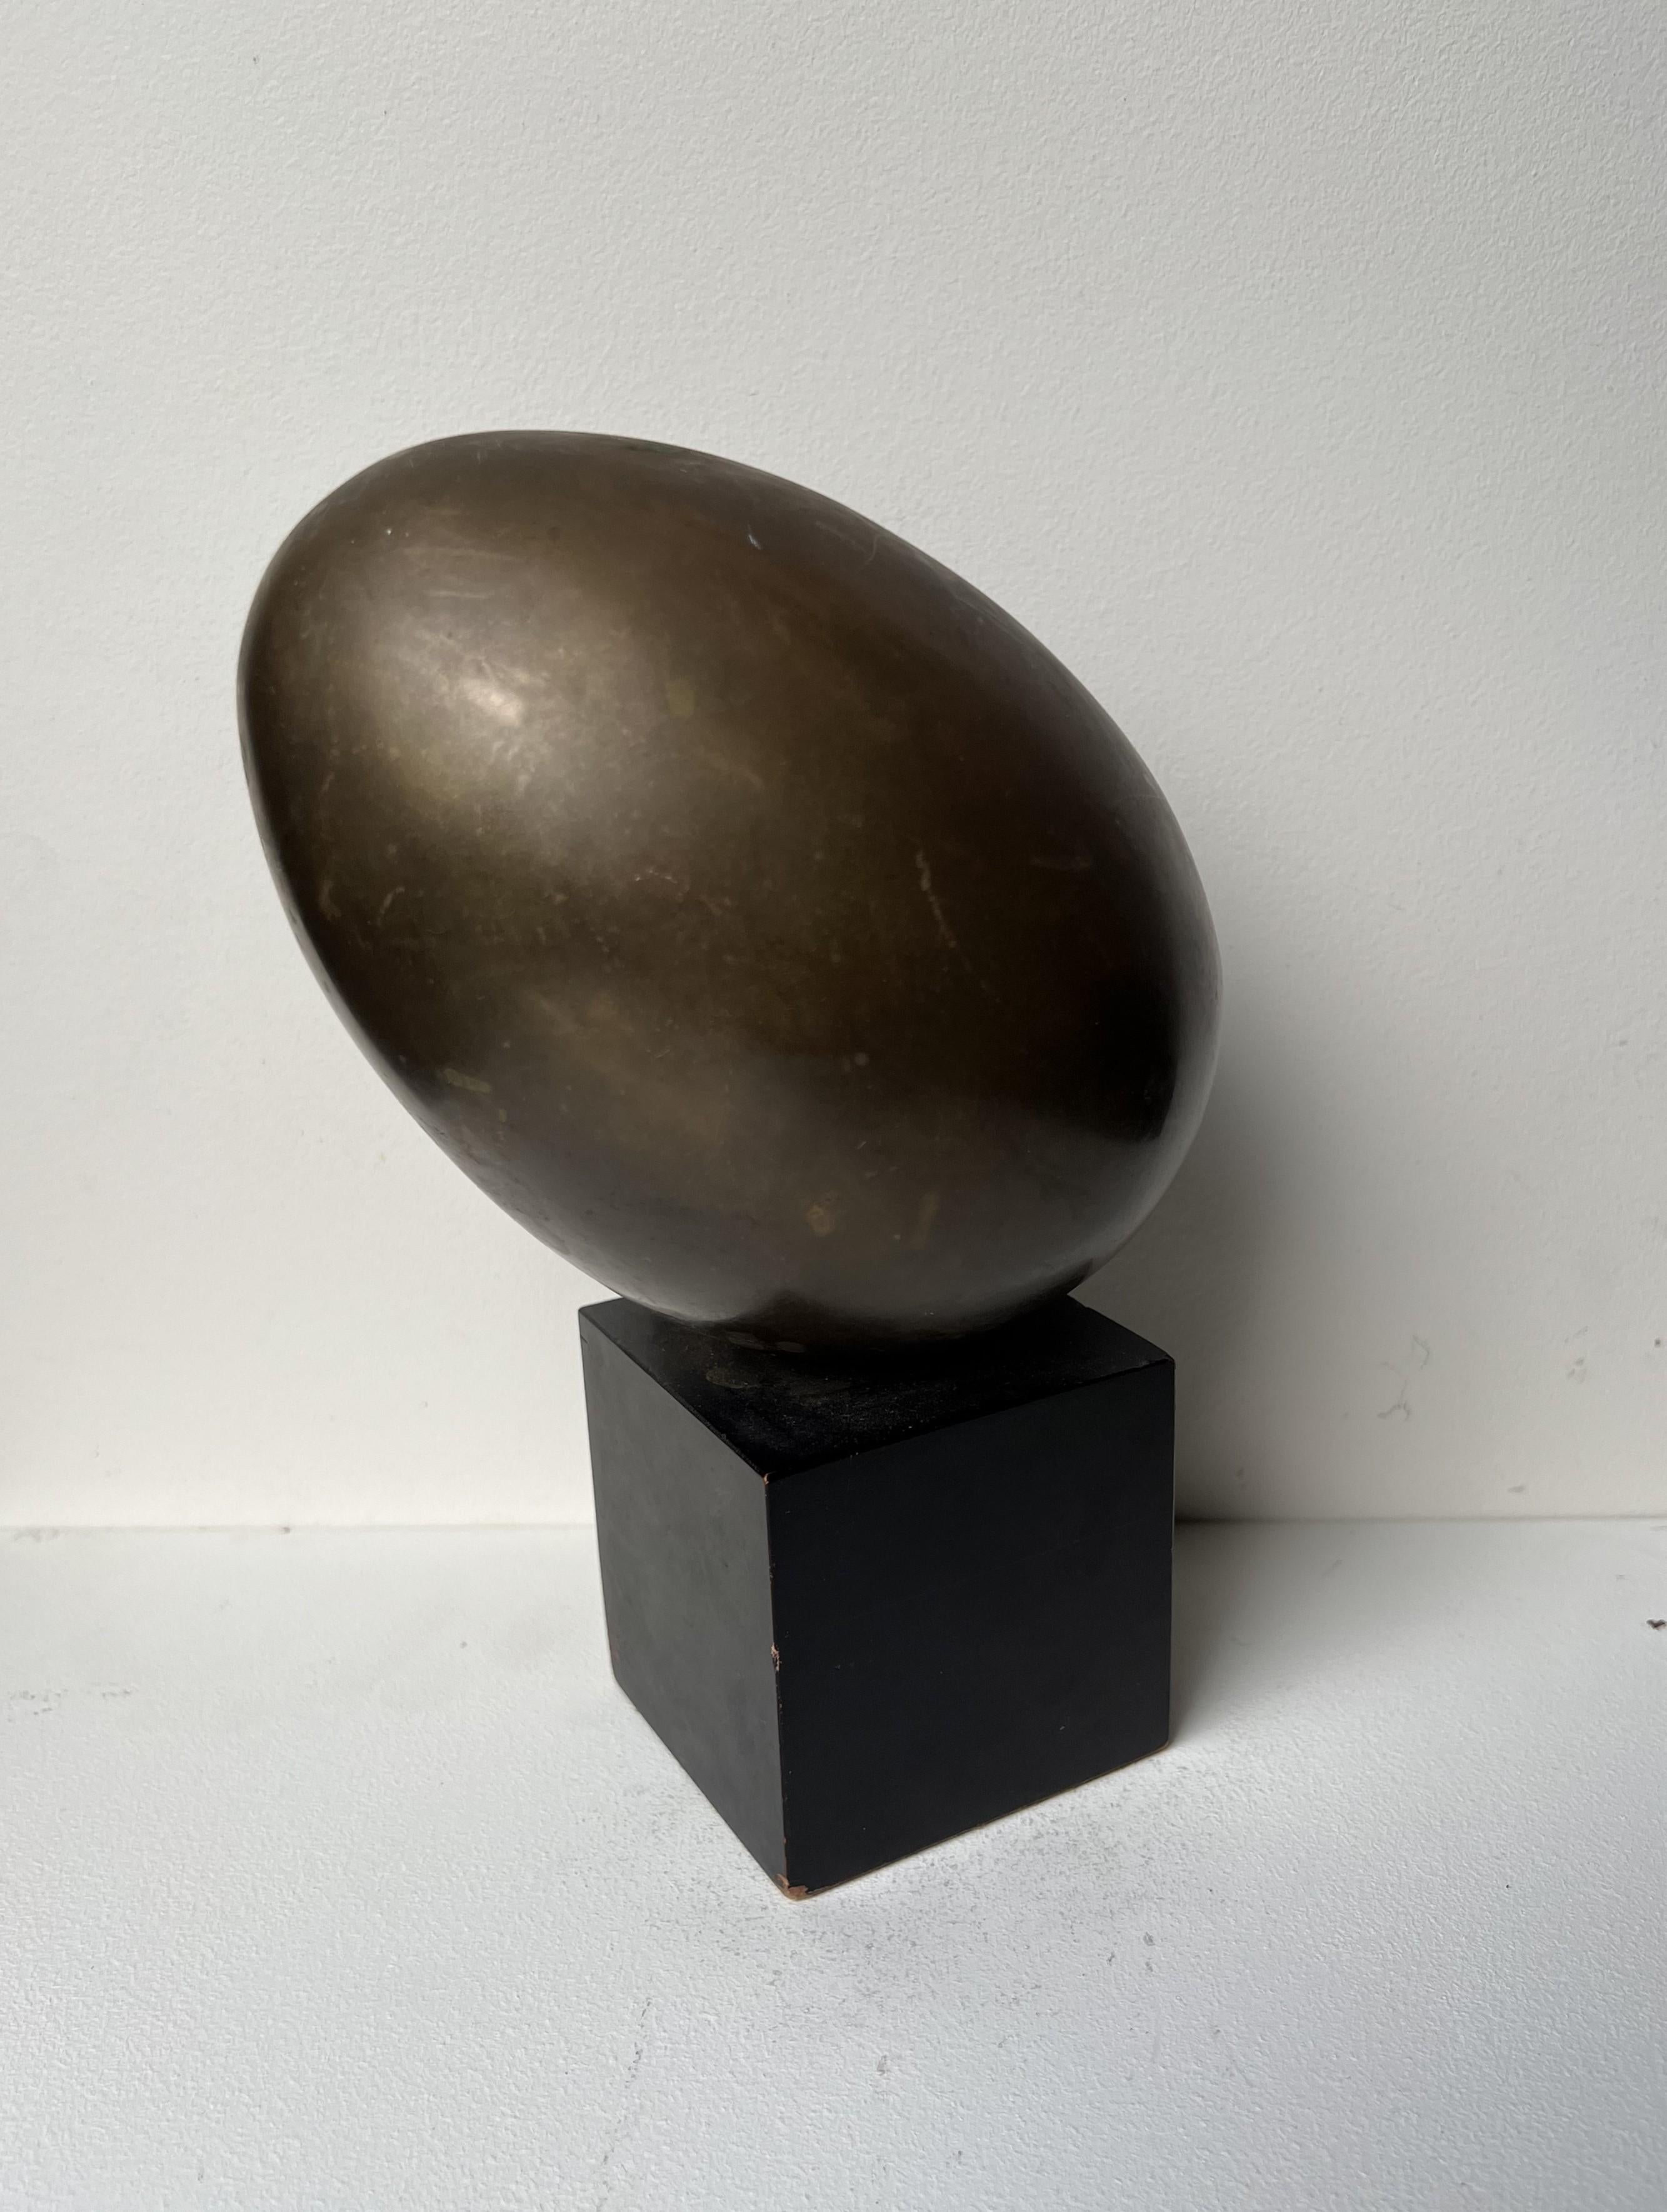 Single solid brass egg atop a small wooden block base. In the manner of Luciano Fontana's Brass Egg with Slash detail, and reminiscent of Carl Auböck's Paperweight  